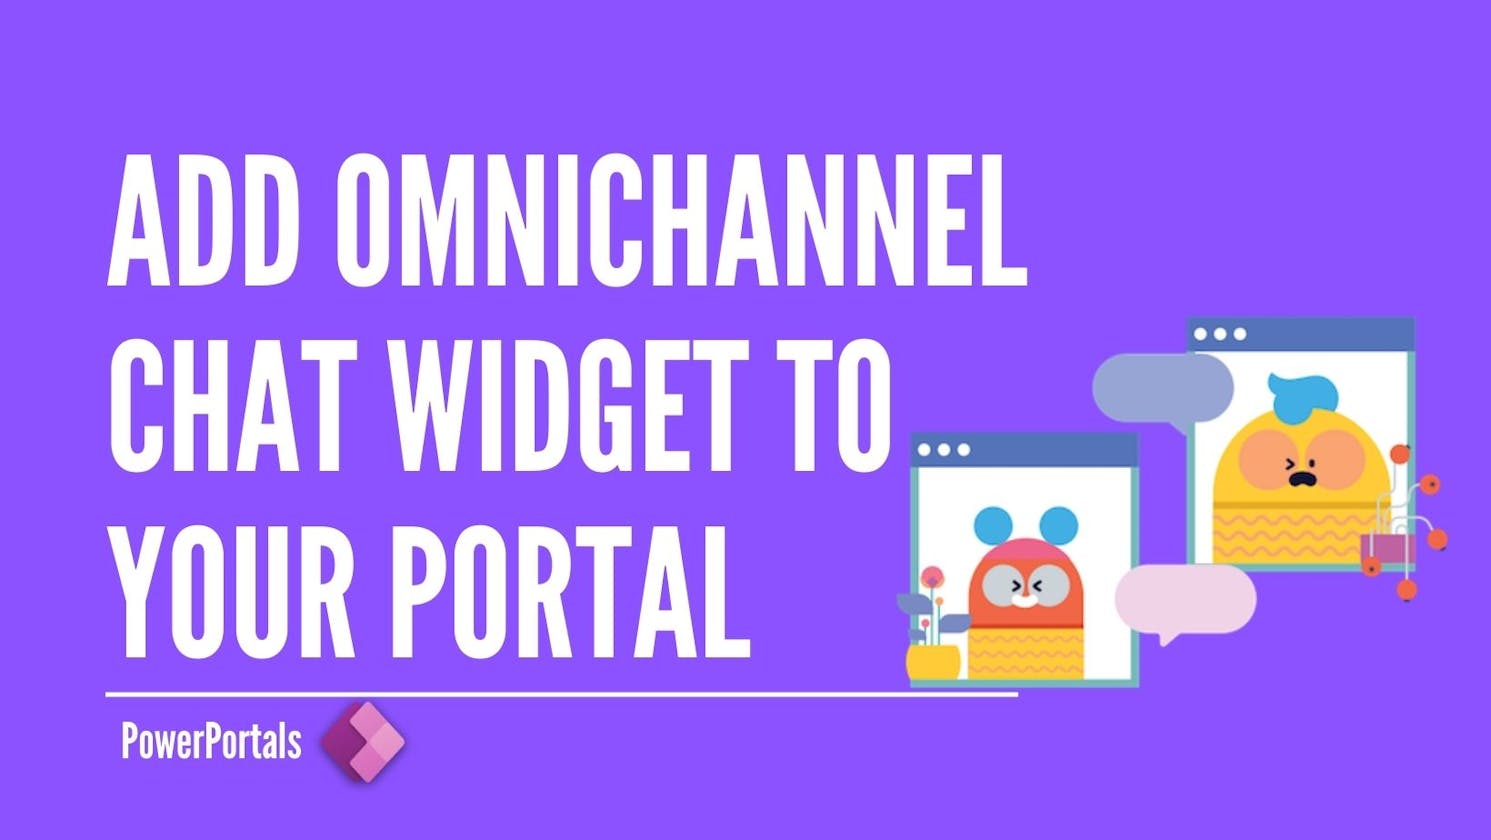 Display Omnichannel chat widget in the footer of your portal